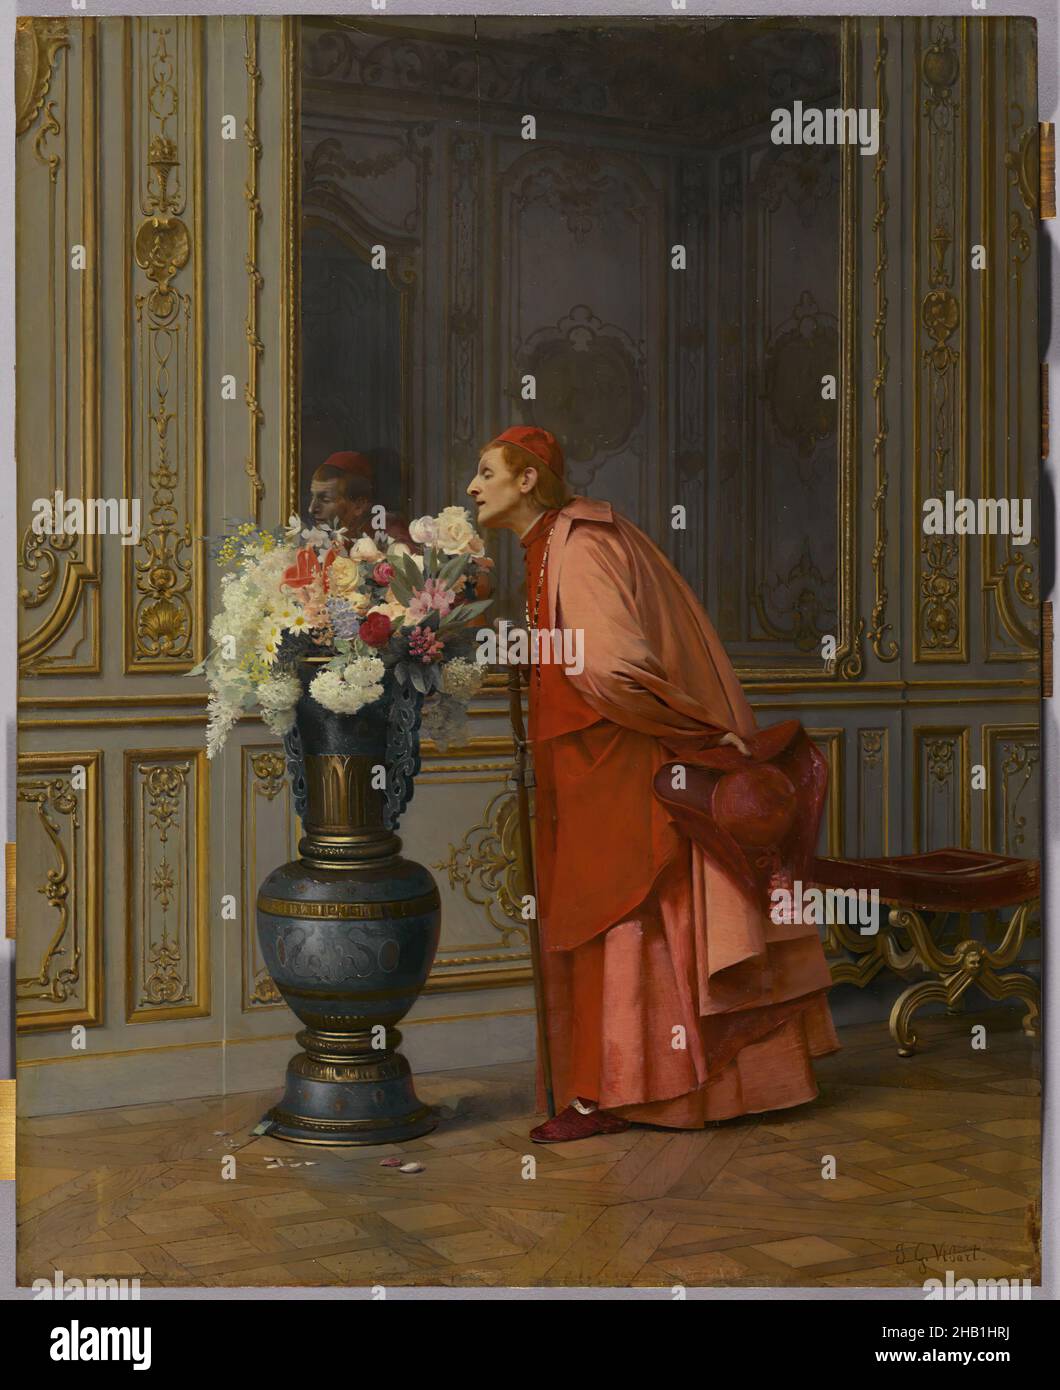 An Embarrassment of Choices, or A Difficult Choice, Un Embarras du Choix, Jehan-Georges Vibert, French, 1840-1902, Oil on panel, France, before 1873, 18 1/8 x 14 1/8 in., 46 x 35.9 cm, 1873, action, anti-Catholic, anti-clerical, aroma, bouquet, cardinal, choice, classic, clergy, European, fleur, flowers, fragrant, freeze, french, glace, hat, interior, Jehan-Georges, man, mirror, mocking, moment, oil, ornate, painting, palace, panel, parquetry, people, red, red robe, reflection, religious, robes, Rococo revival, satire, scarlet, smell, smelling, sniffing, urn, vase, Vibert, x-ray Stock Photo